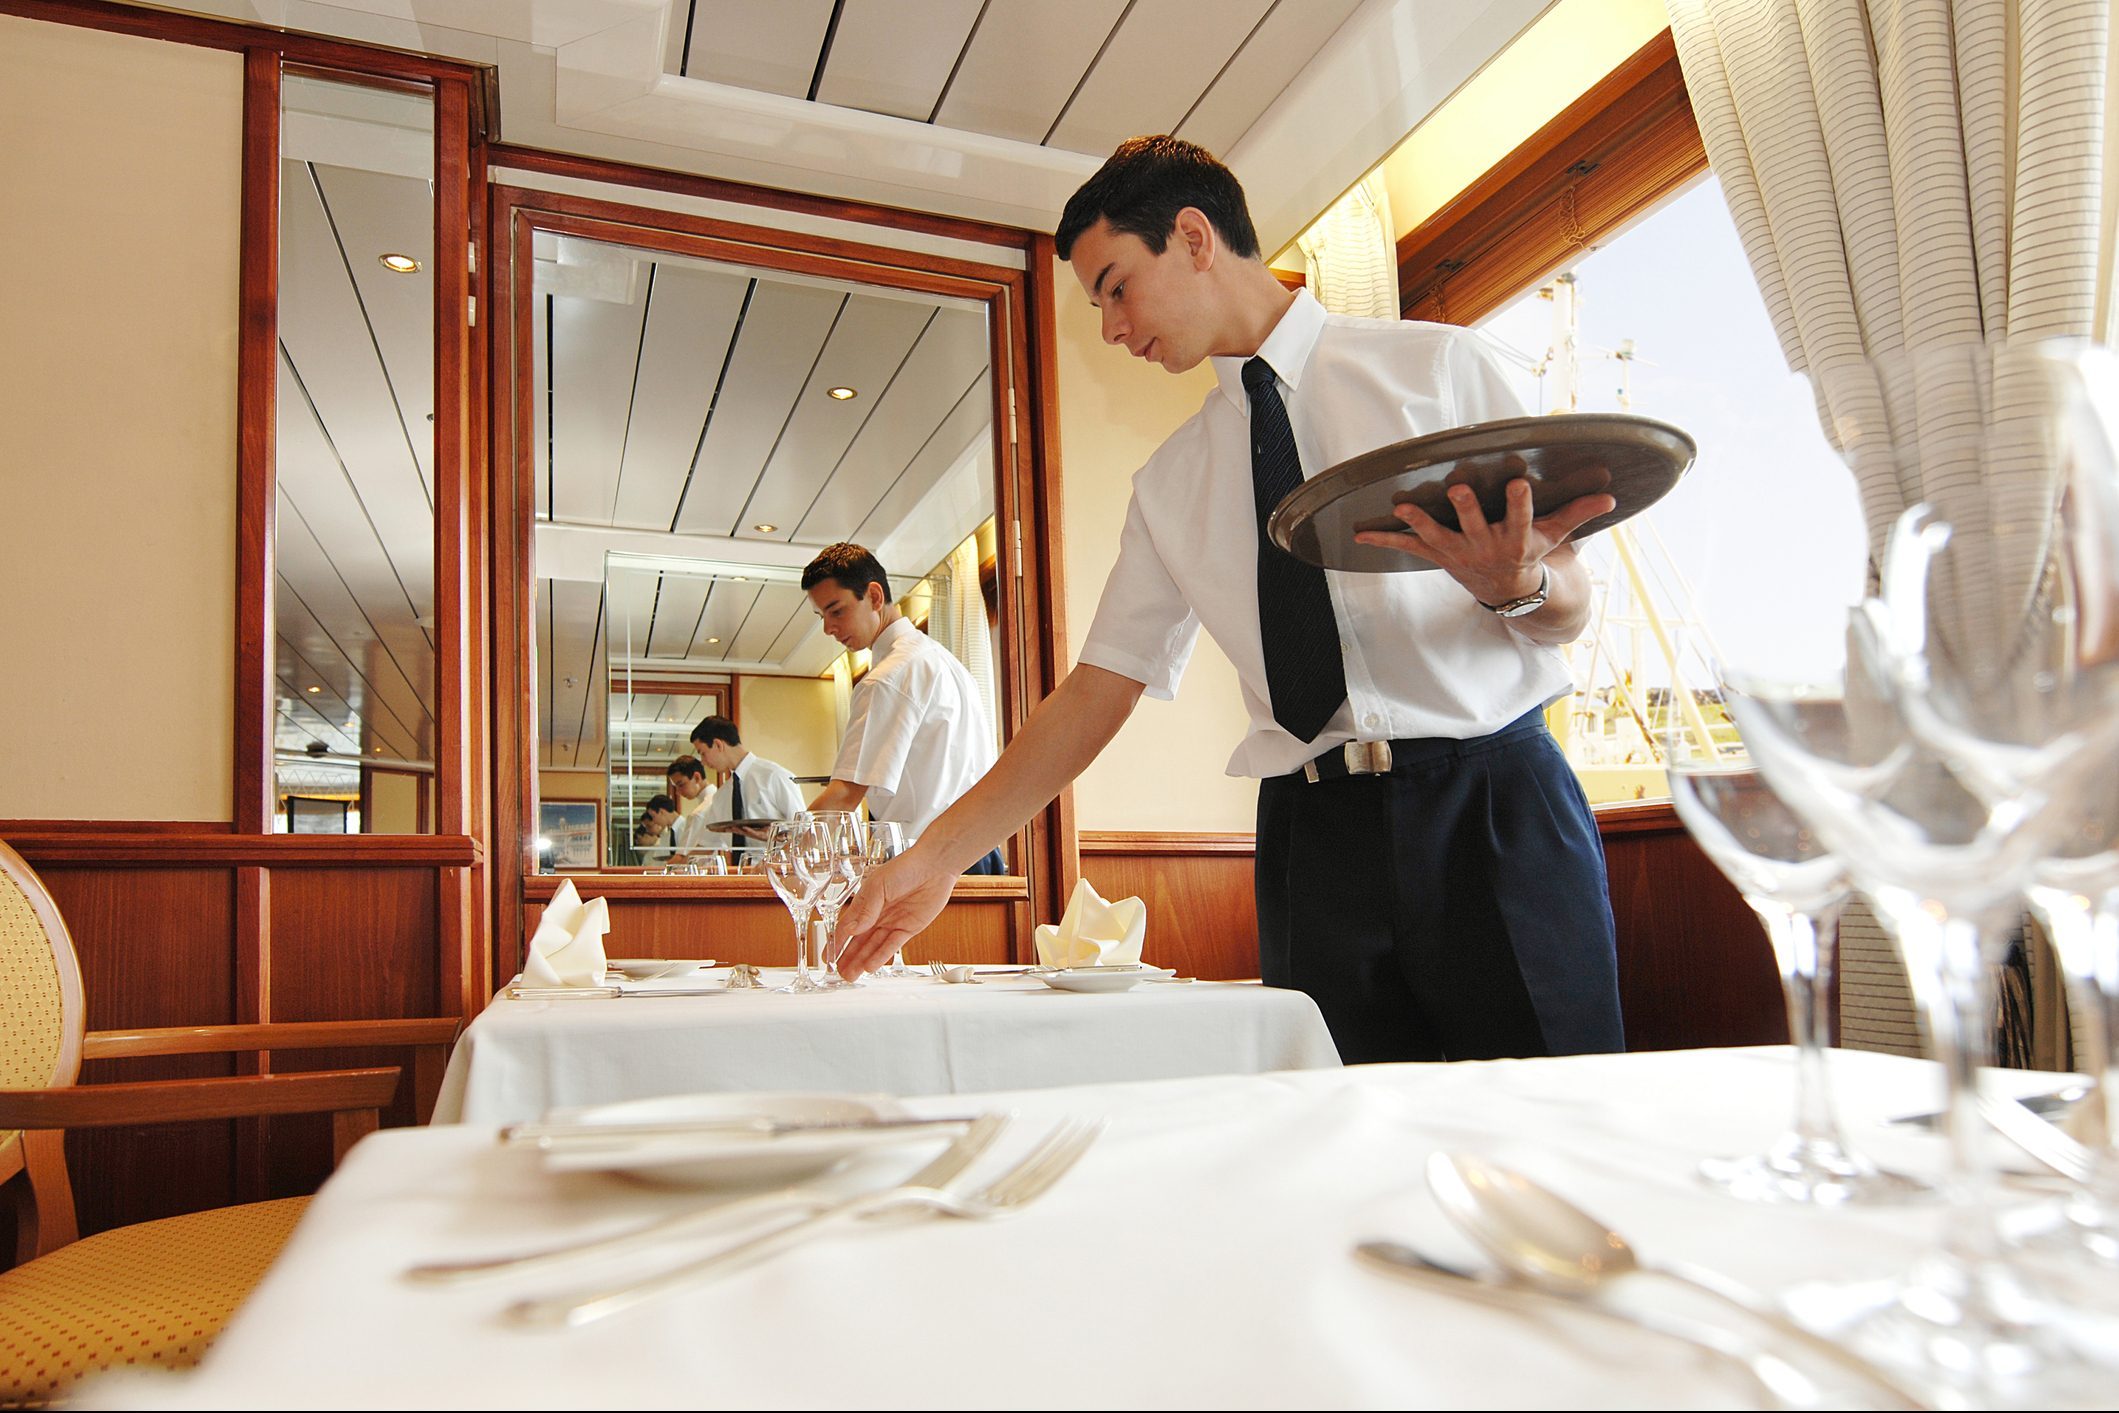 <p>It's true that <a href="https://www.rd.com/article/how-much-to-tip/">tipping</a> isn't the same on cruises as it is in other places—after all, most cruises are all-inclusive. But there are different levels of "all-inclusive." Luxury <a href="https://www.rd.com/list/best-all-inclusive-cruises/" rel="noopener noreferrer">all-inclusive cruises</a> don't require or expect tipping at all, while "regular" all-inclusive cruises don't require tips for basic services ... but it's a nice gesture, particularly if the staff member went above and beyond to help you.</p> <p><strong>What to do instead: </strong>It's still polite to tip your waiter $5 and your bartender $1 per drink at the restaurants. You can add it to the check or to your room tab, but cash tips are preferred. Bring at least $100 in cash with you onboard for tips and incidental expenses.</p>